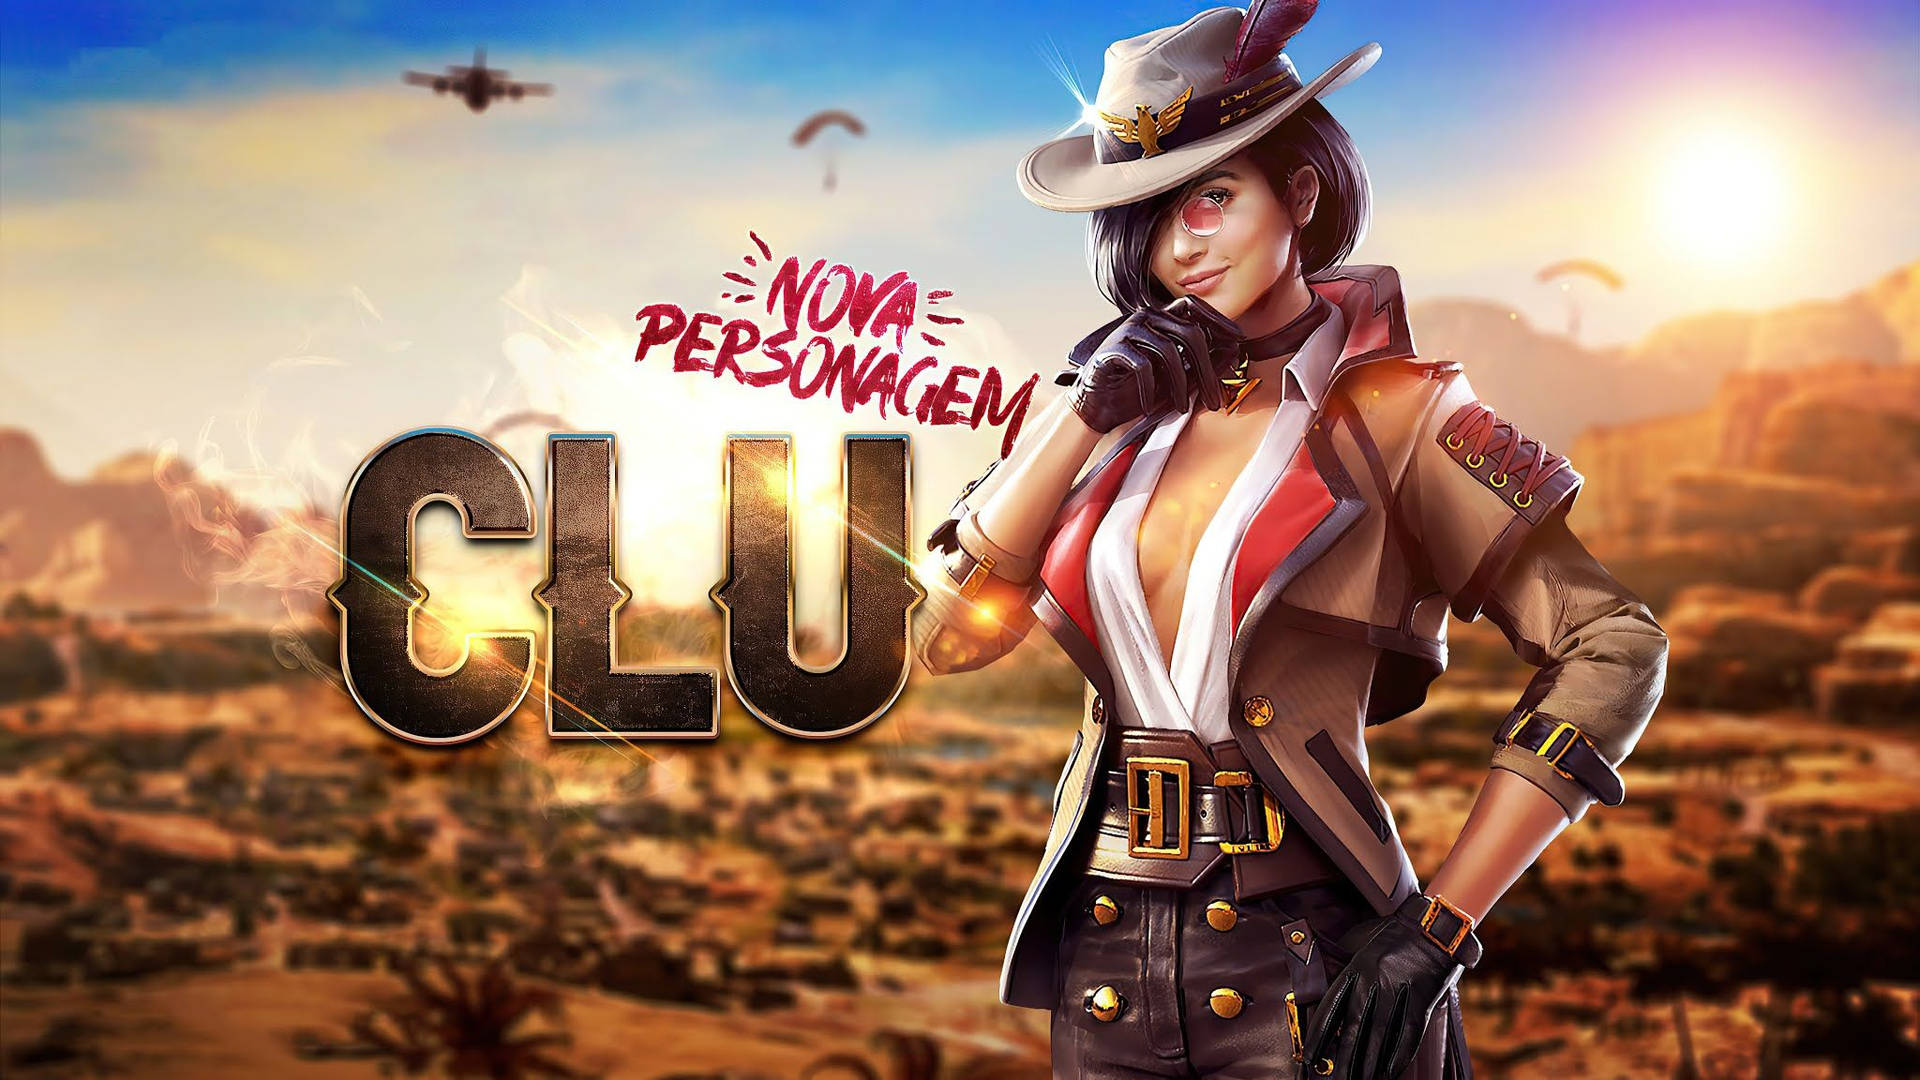 Free Fire Character Clue Background